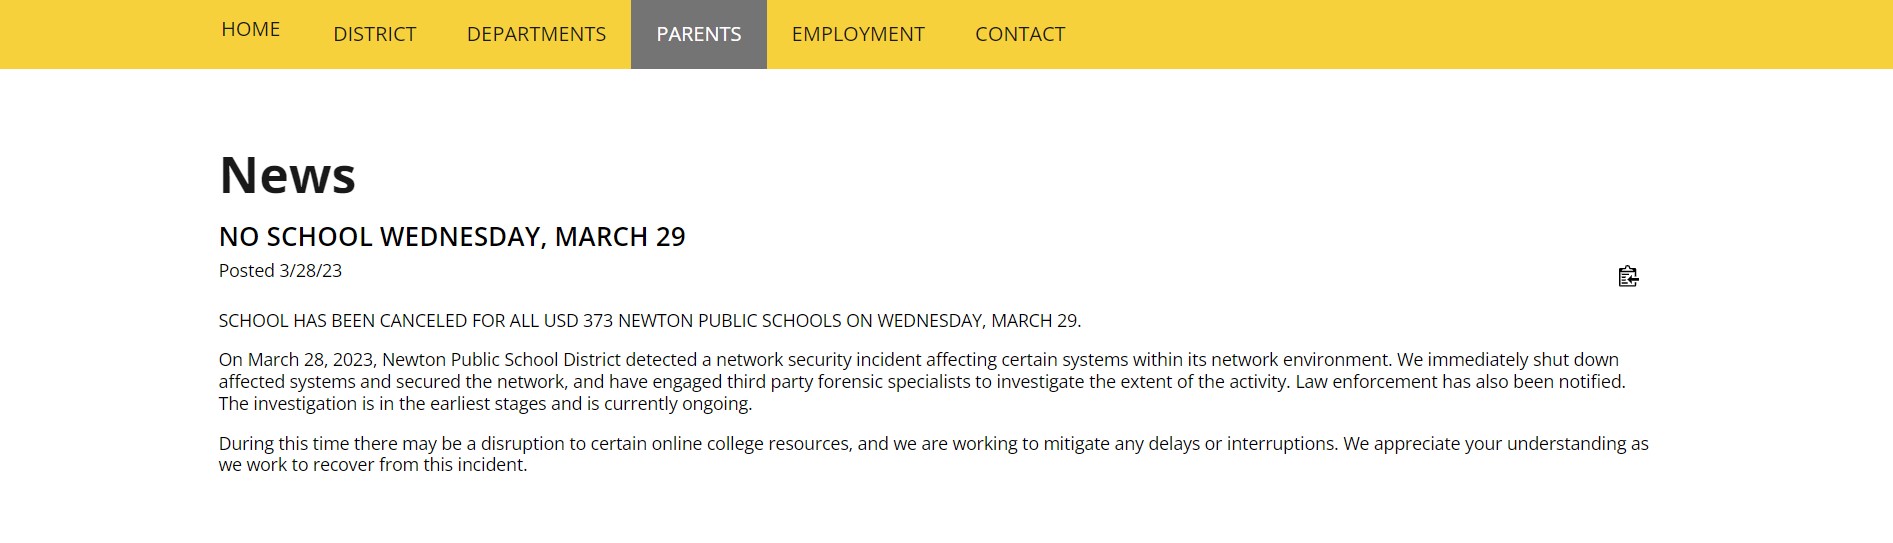 Website notice to parents about school closure due to security incident includes this statement: "During this time there may be a disruption to certain online college resources, and we are working to mitigate any delays or interruptions. We appreciate your understanding as we work to recover from this incident."